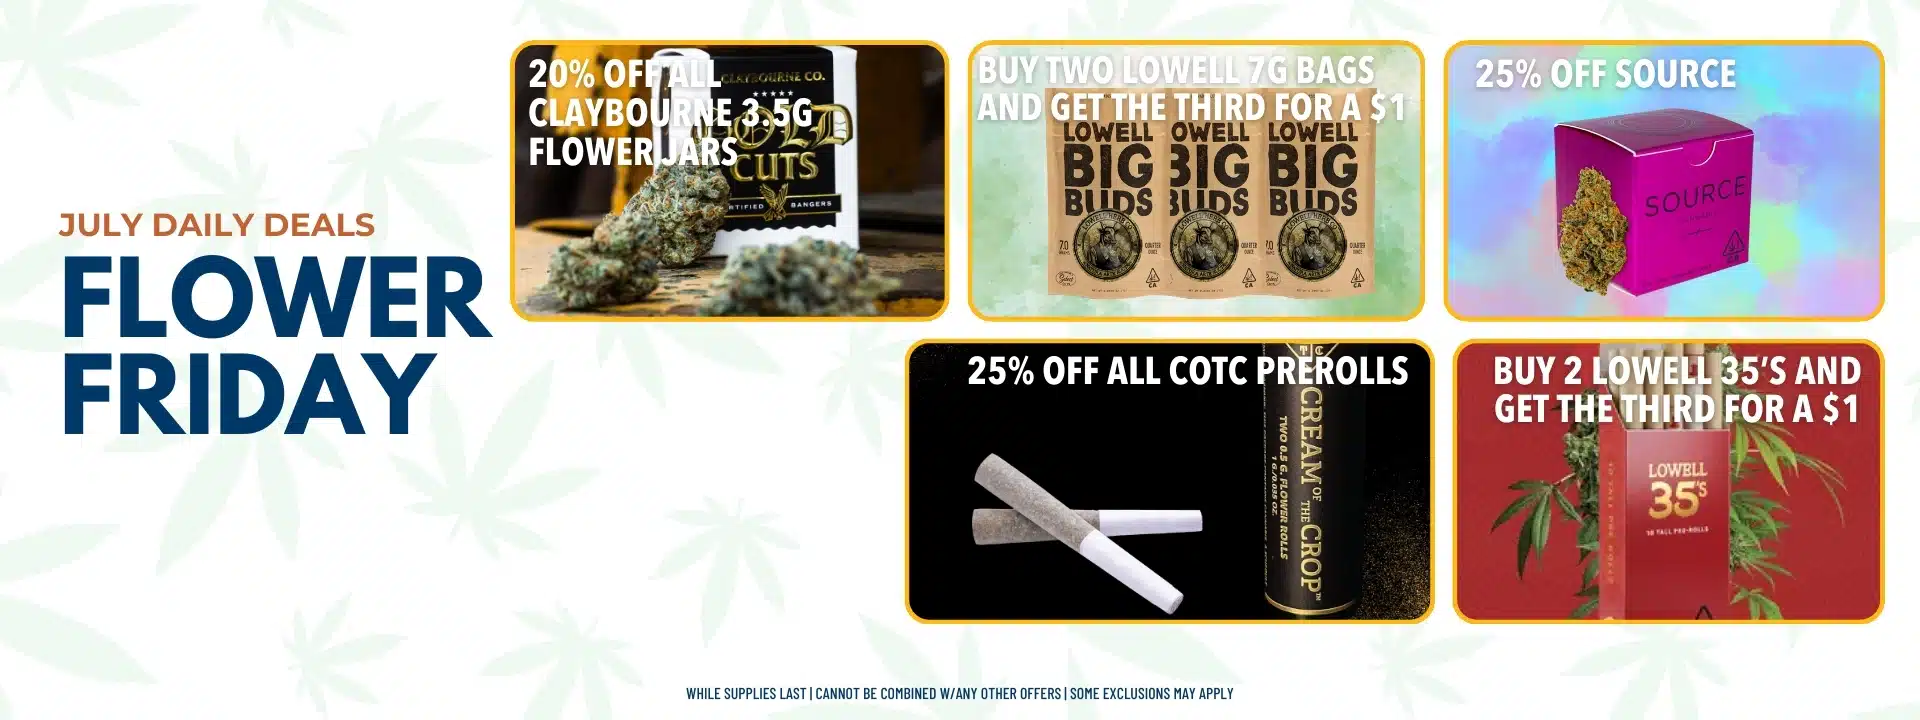 Product images with text overlay that reads: JULY DAILY DEALS. FLOWER FRIDAY. 20% off all Claybourne 3.5g Flower Jars, Buy Two Lowell 7g bags and get the third for $1, 25% off Source, 25% off all COTC prerolls, Buy 2 Lowell 35's and get the third for $1.